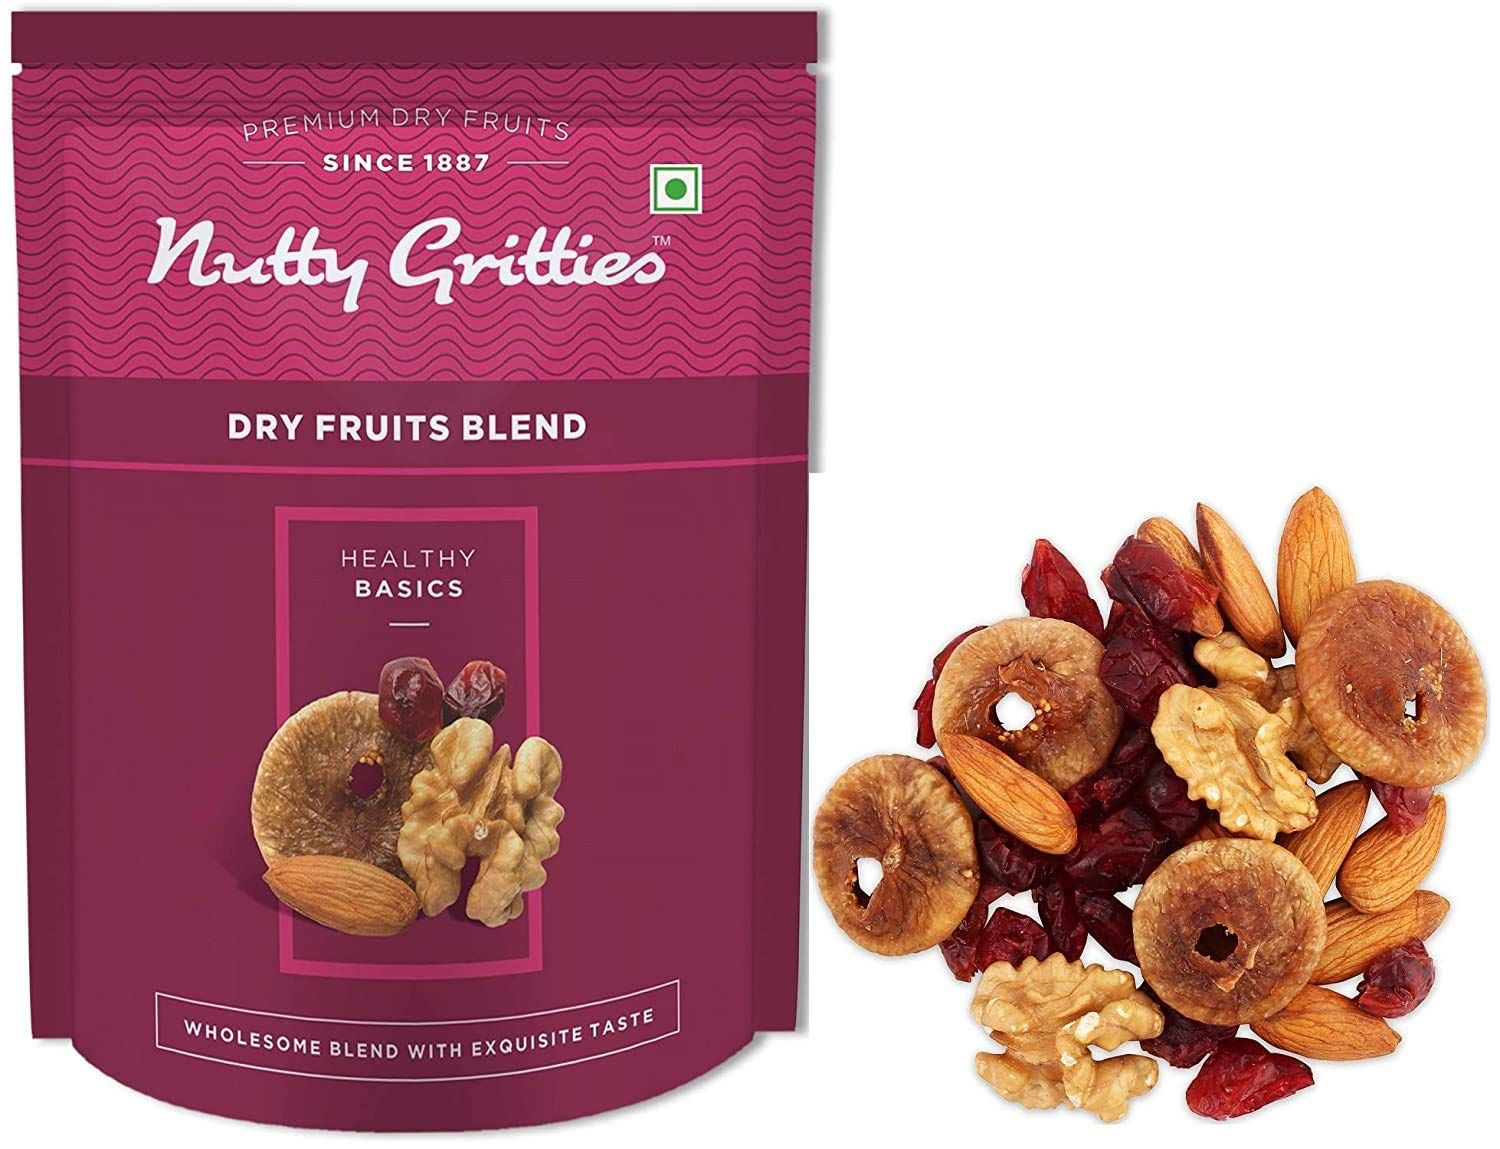 Nutty Gritties Dry Fruits Blend Image